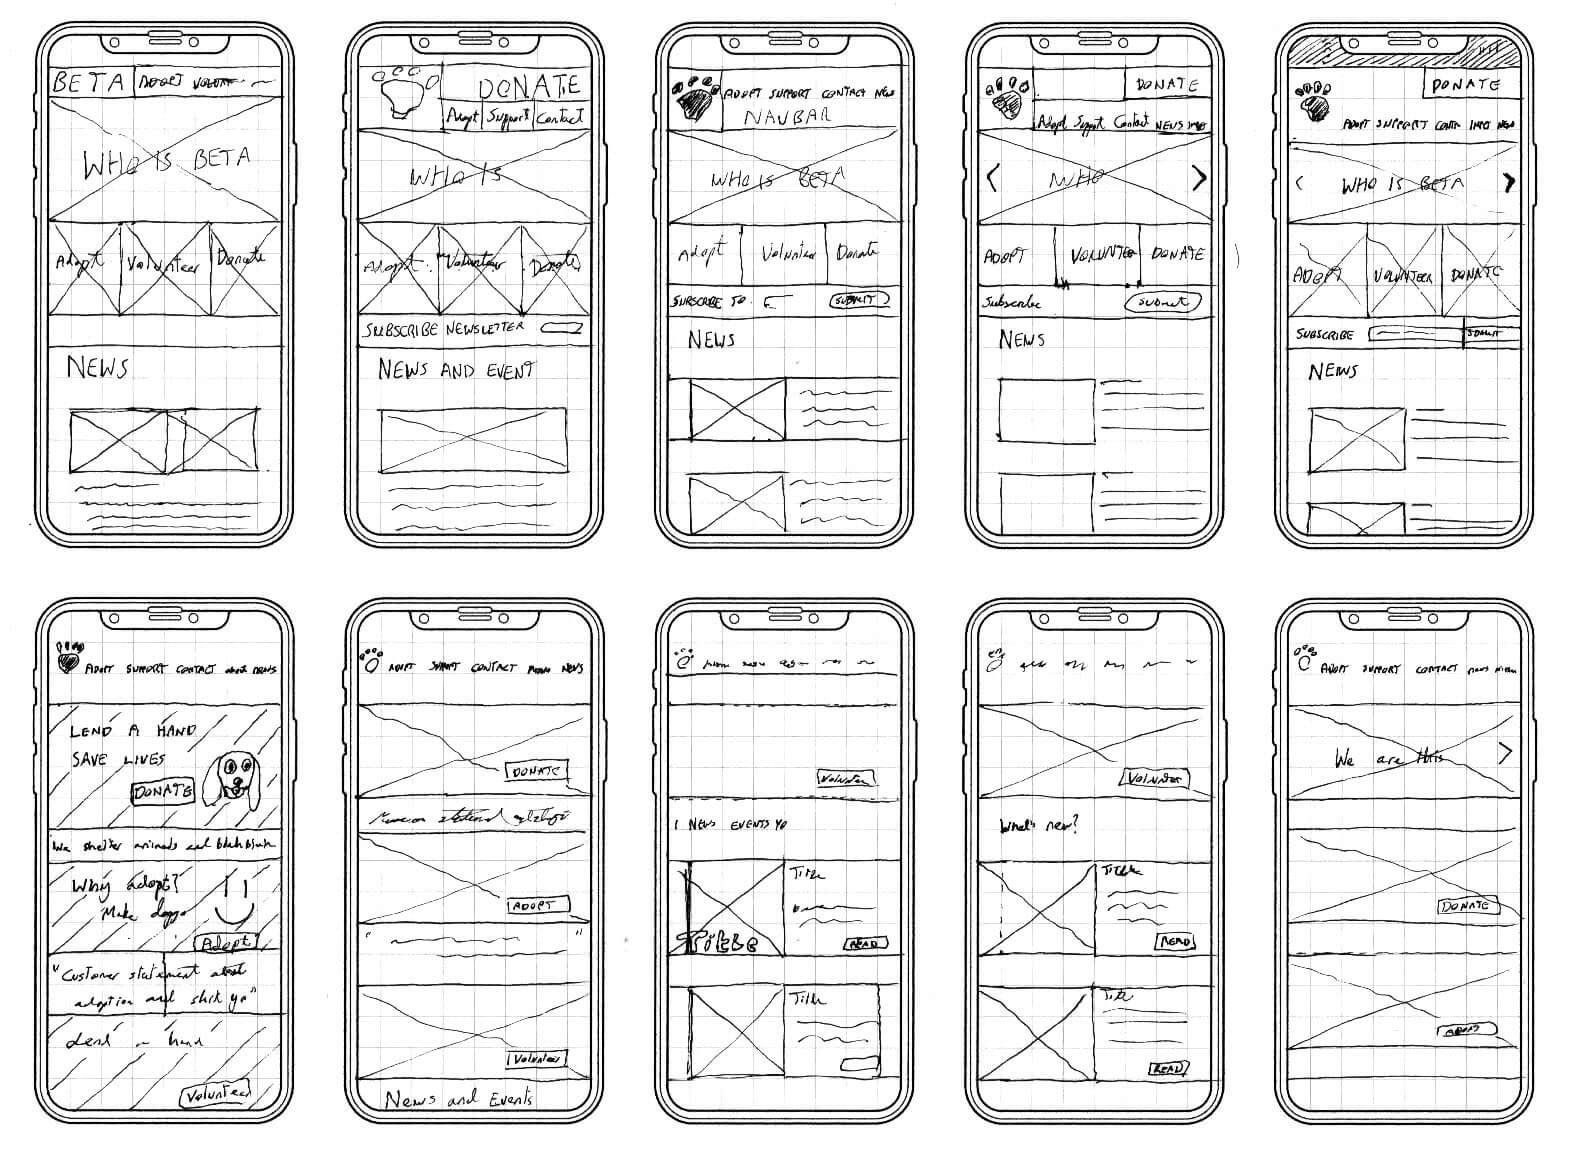 A series of preliminary wireframes drawn by hand that were part of the UX design development phase